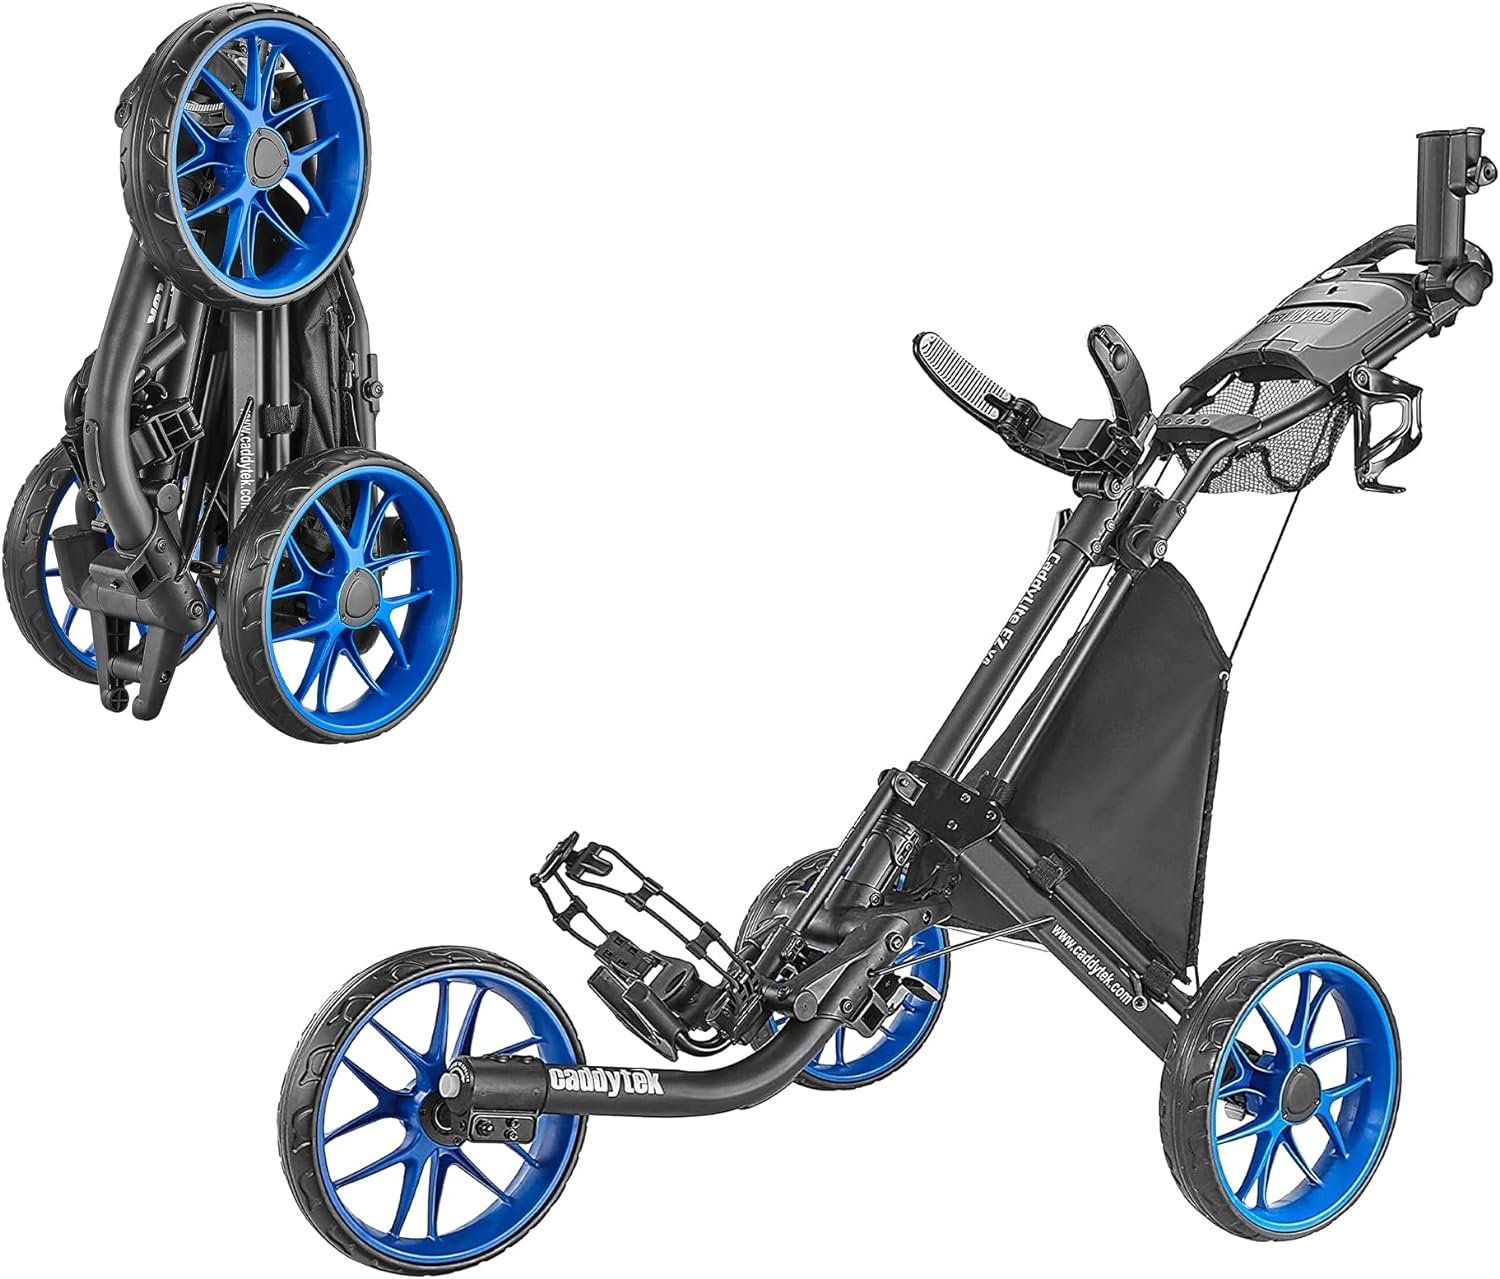 CaddyTek 3 Wheel Golf Push Cart - Foldable Collapsible Lightweight Pushcart with Foot Brake - Easy to Open  Close